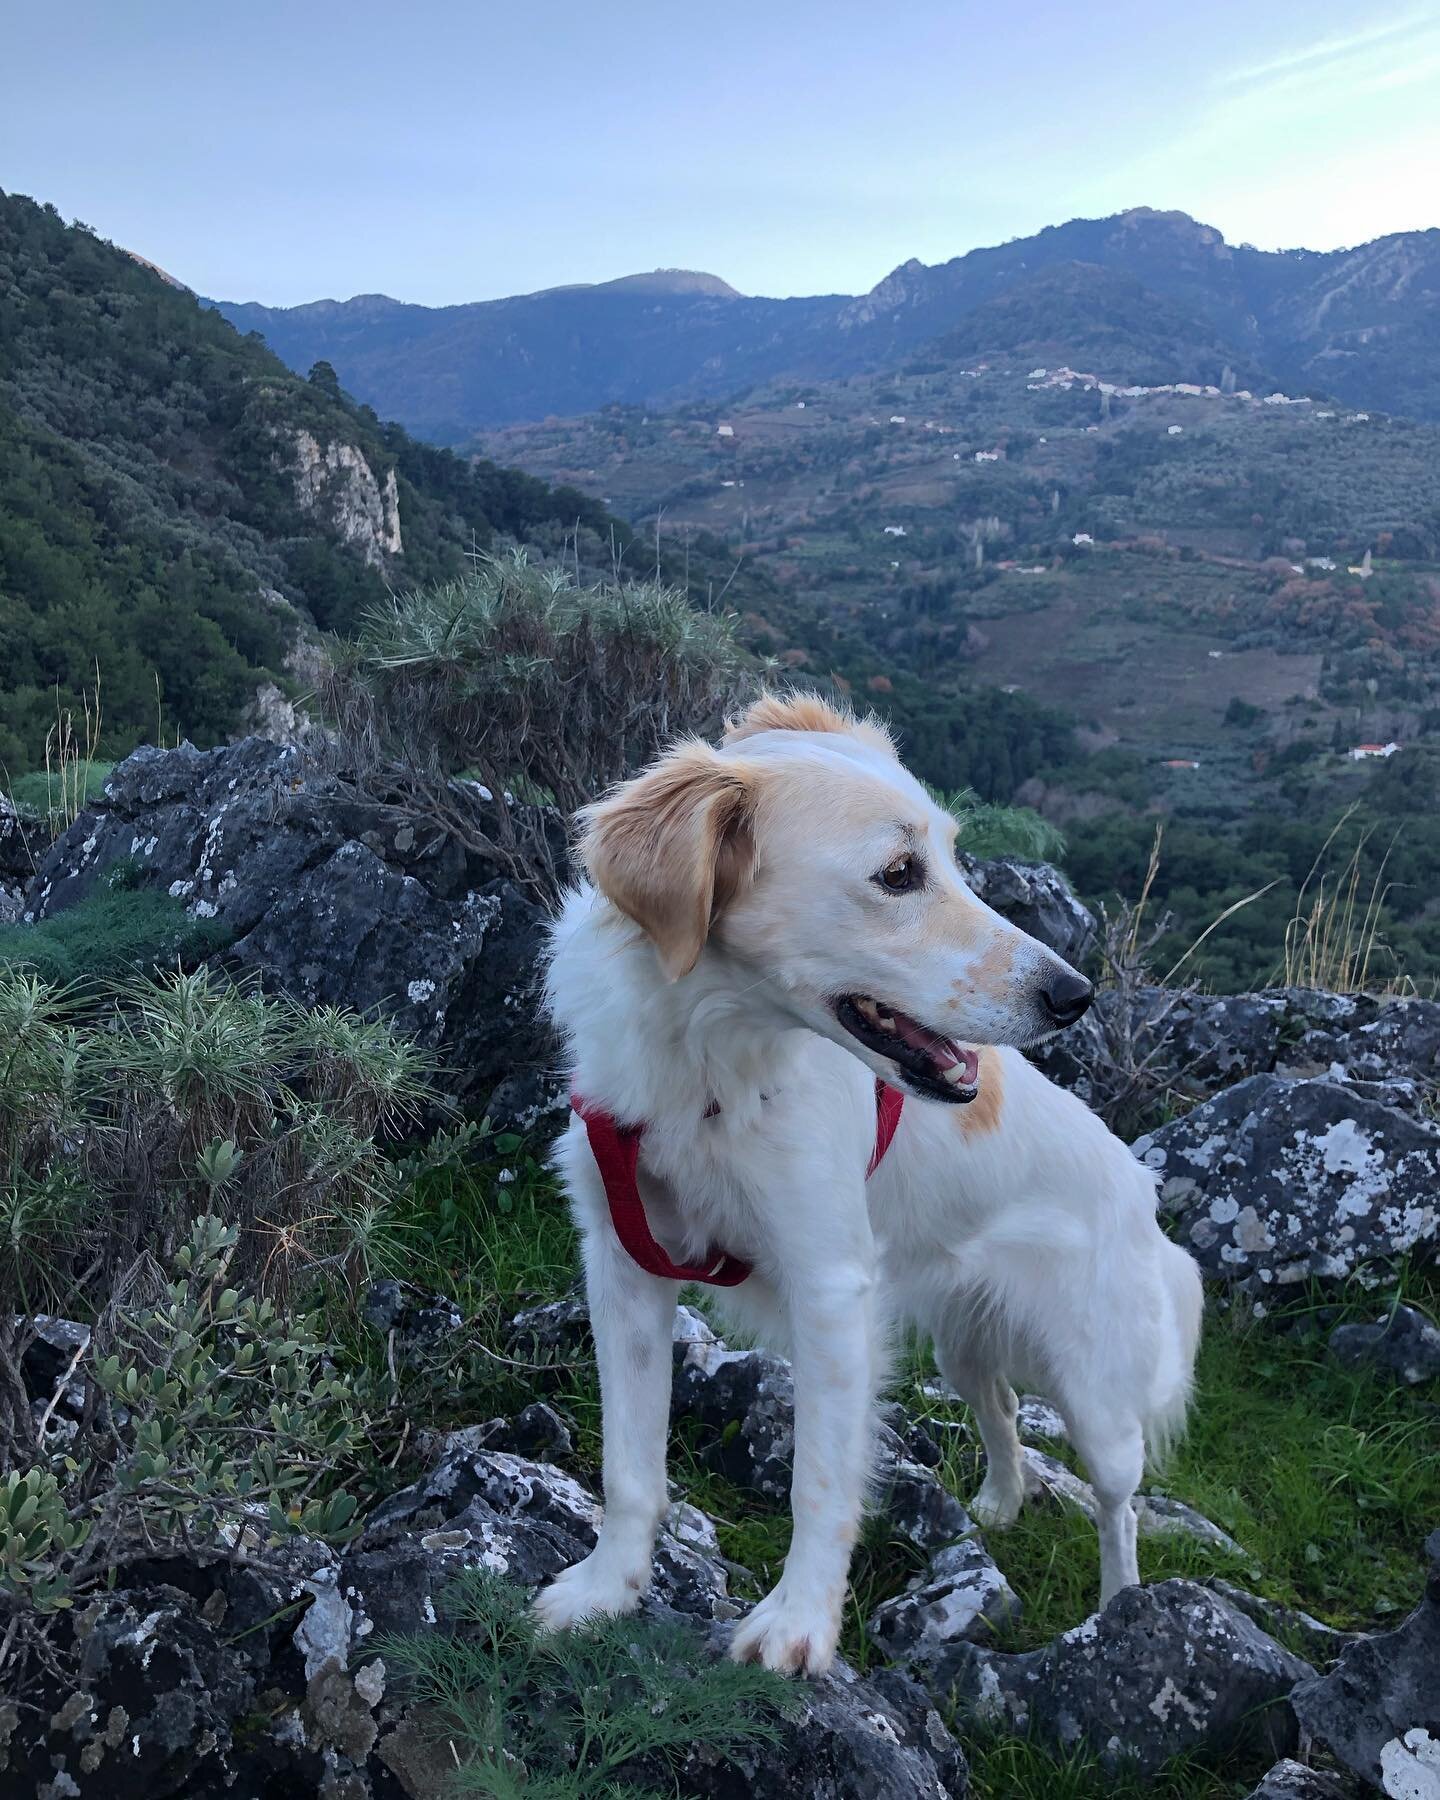 My new buddy thanks to @trustedhousesitters  #dogsofinstagram #rescusedog #hiking #mountains #greece #trustedtales